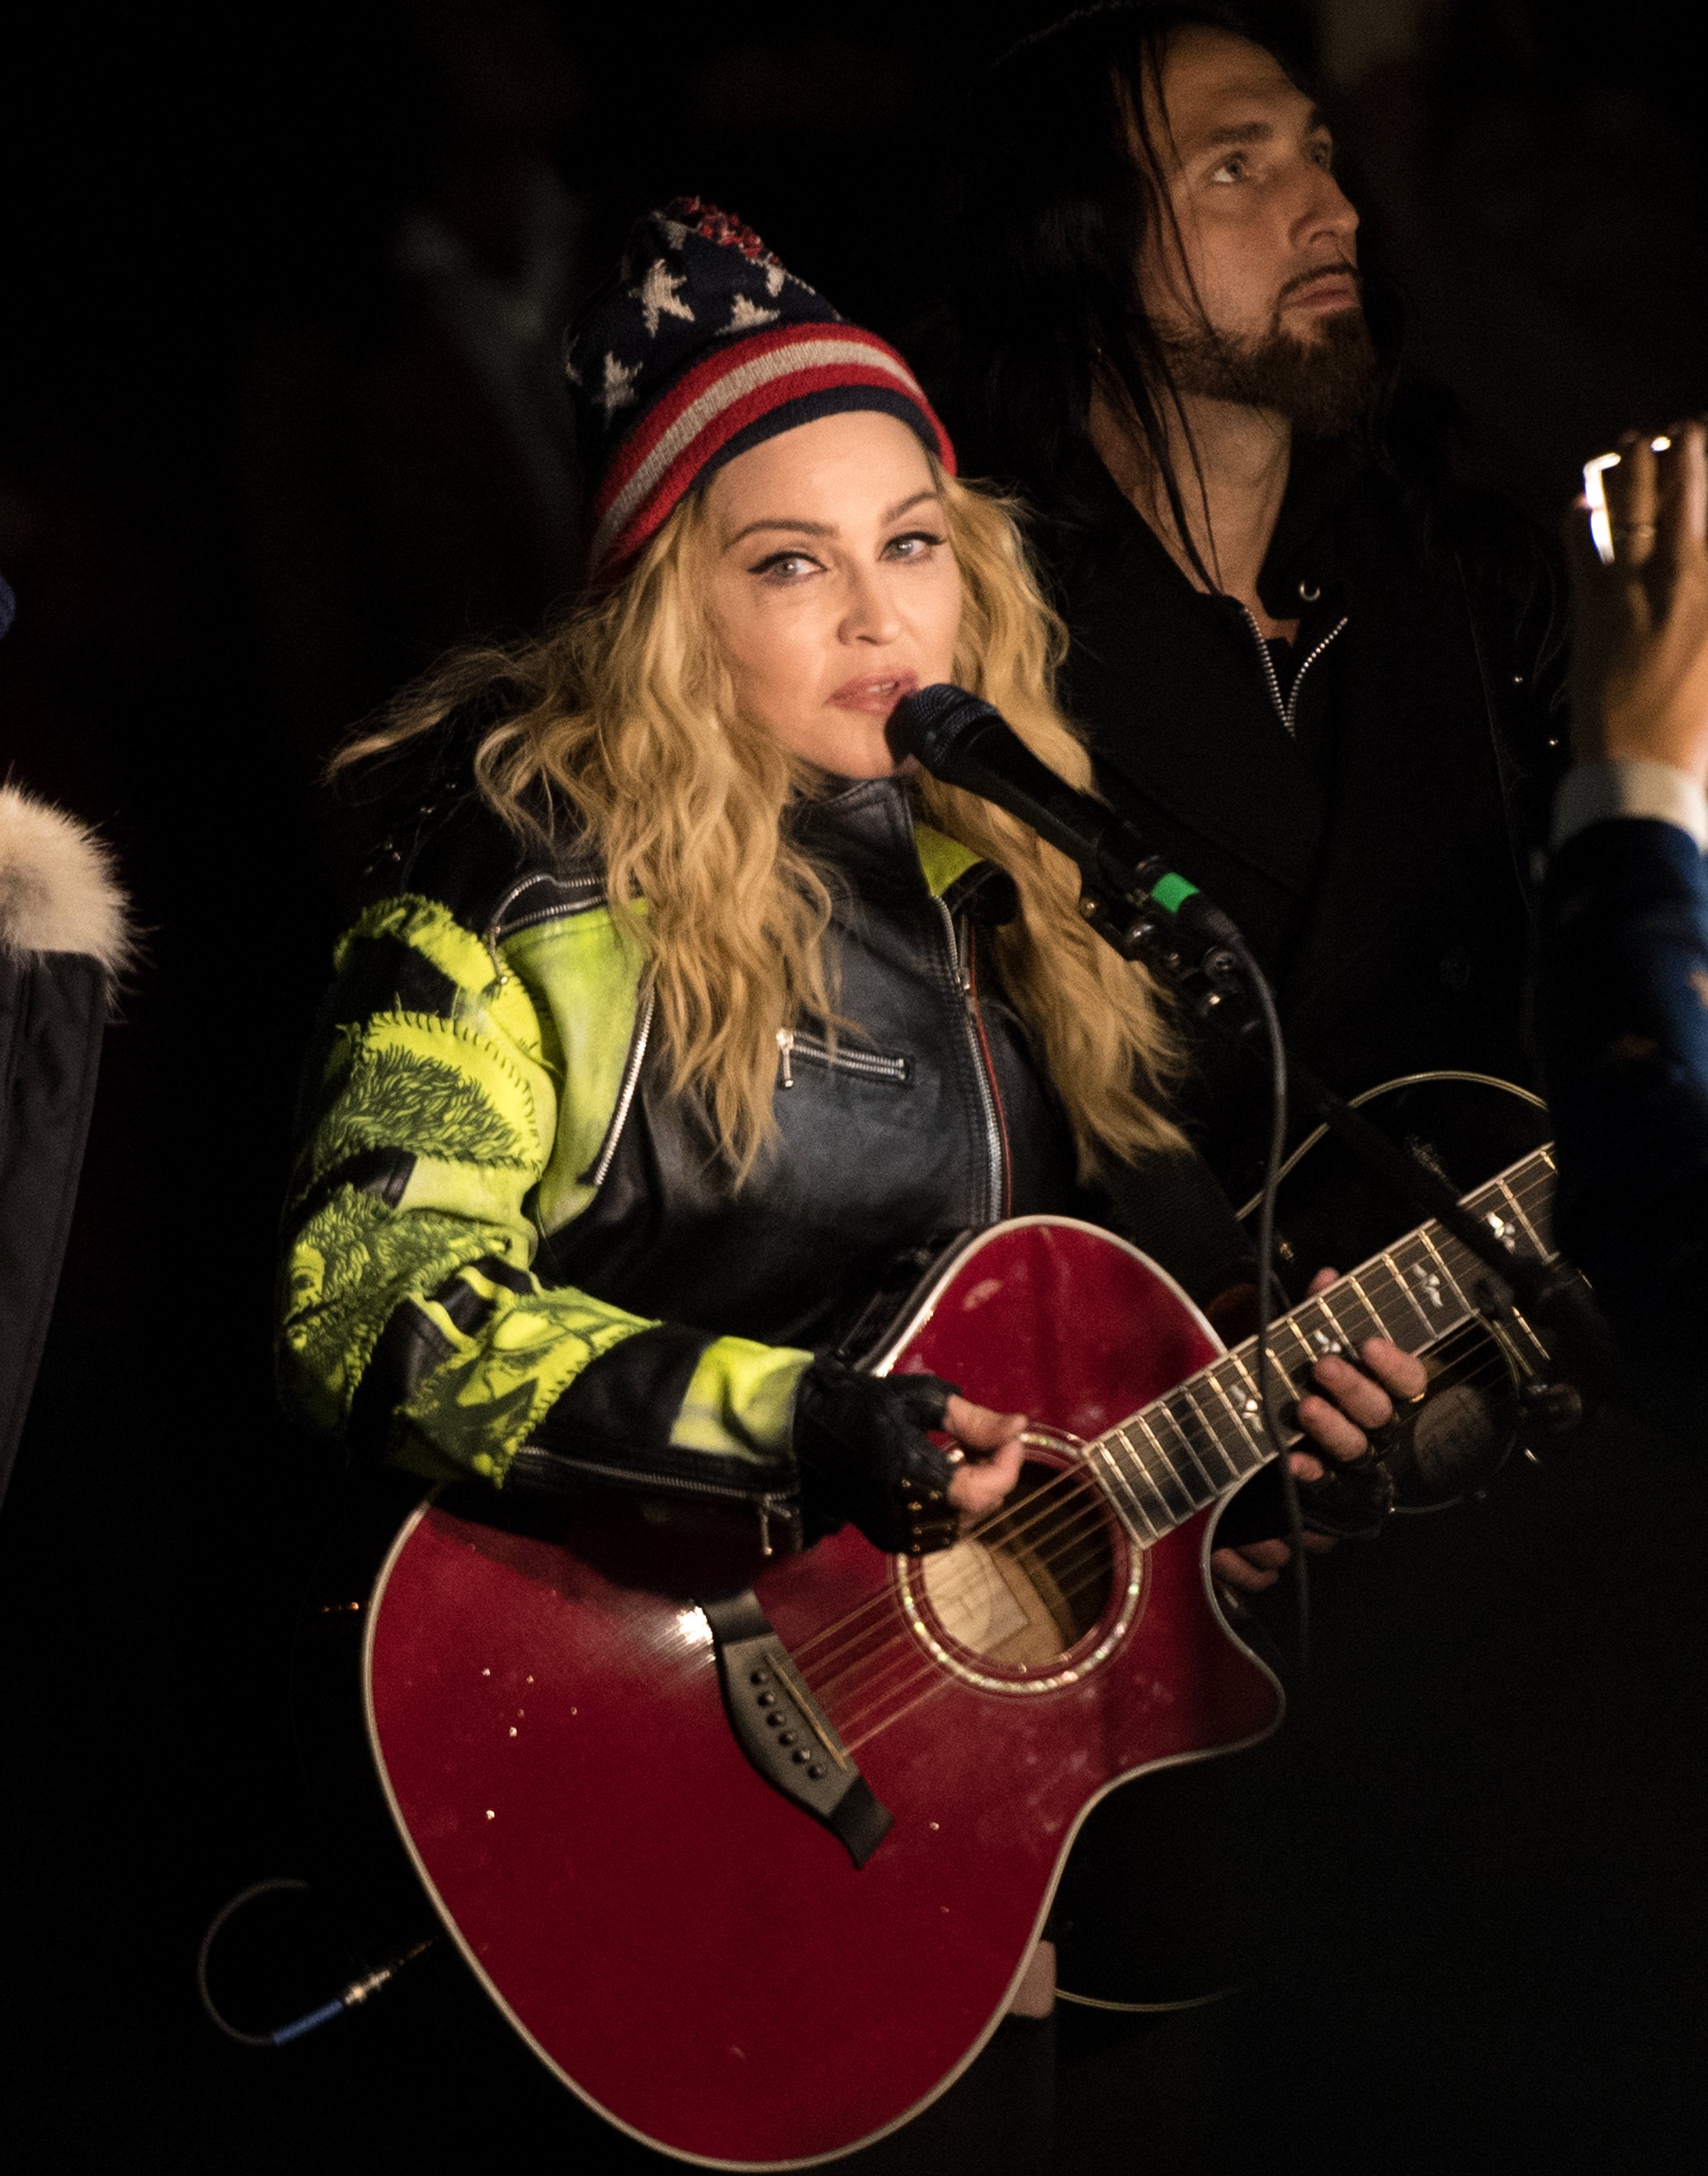 Madonna holds a rally in NYC to support Hillary Clinton at Washington Square Park on November 7, 2016 in New York City